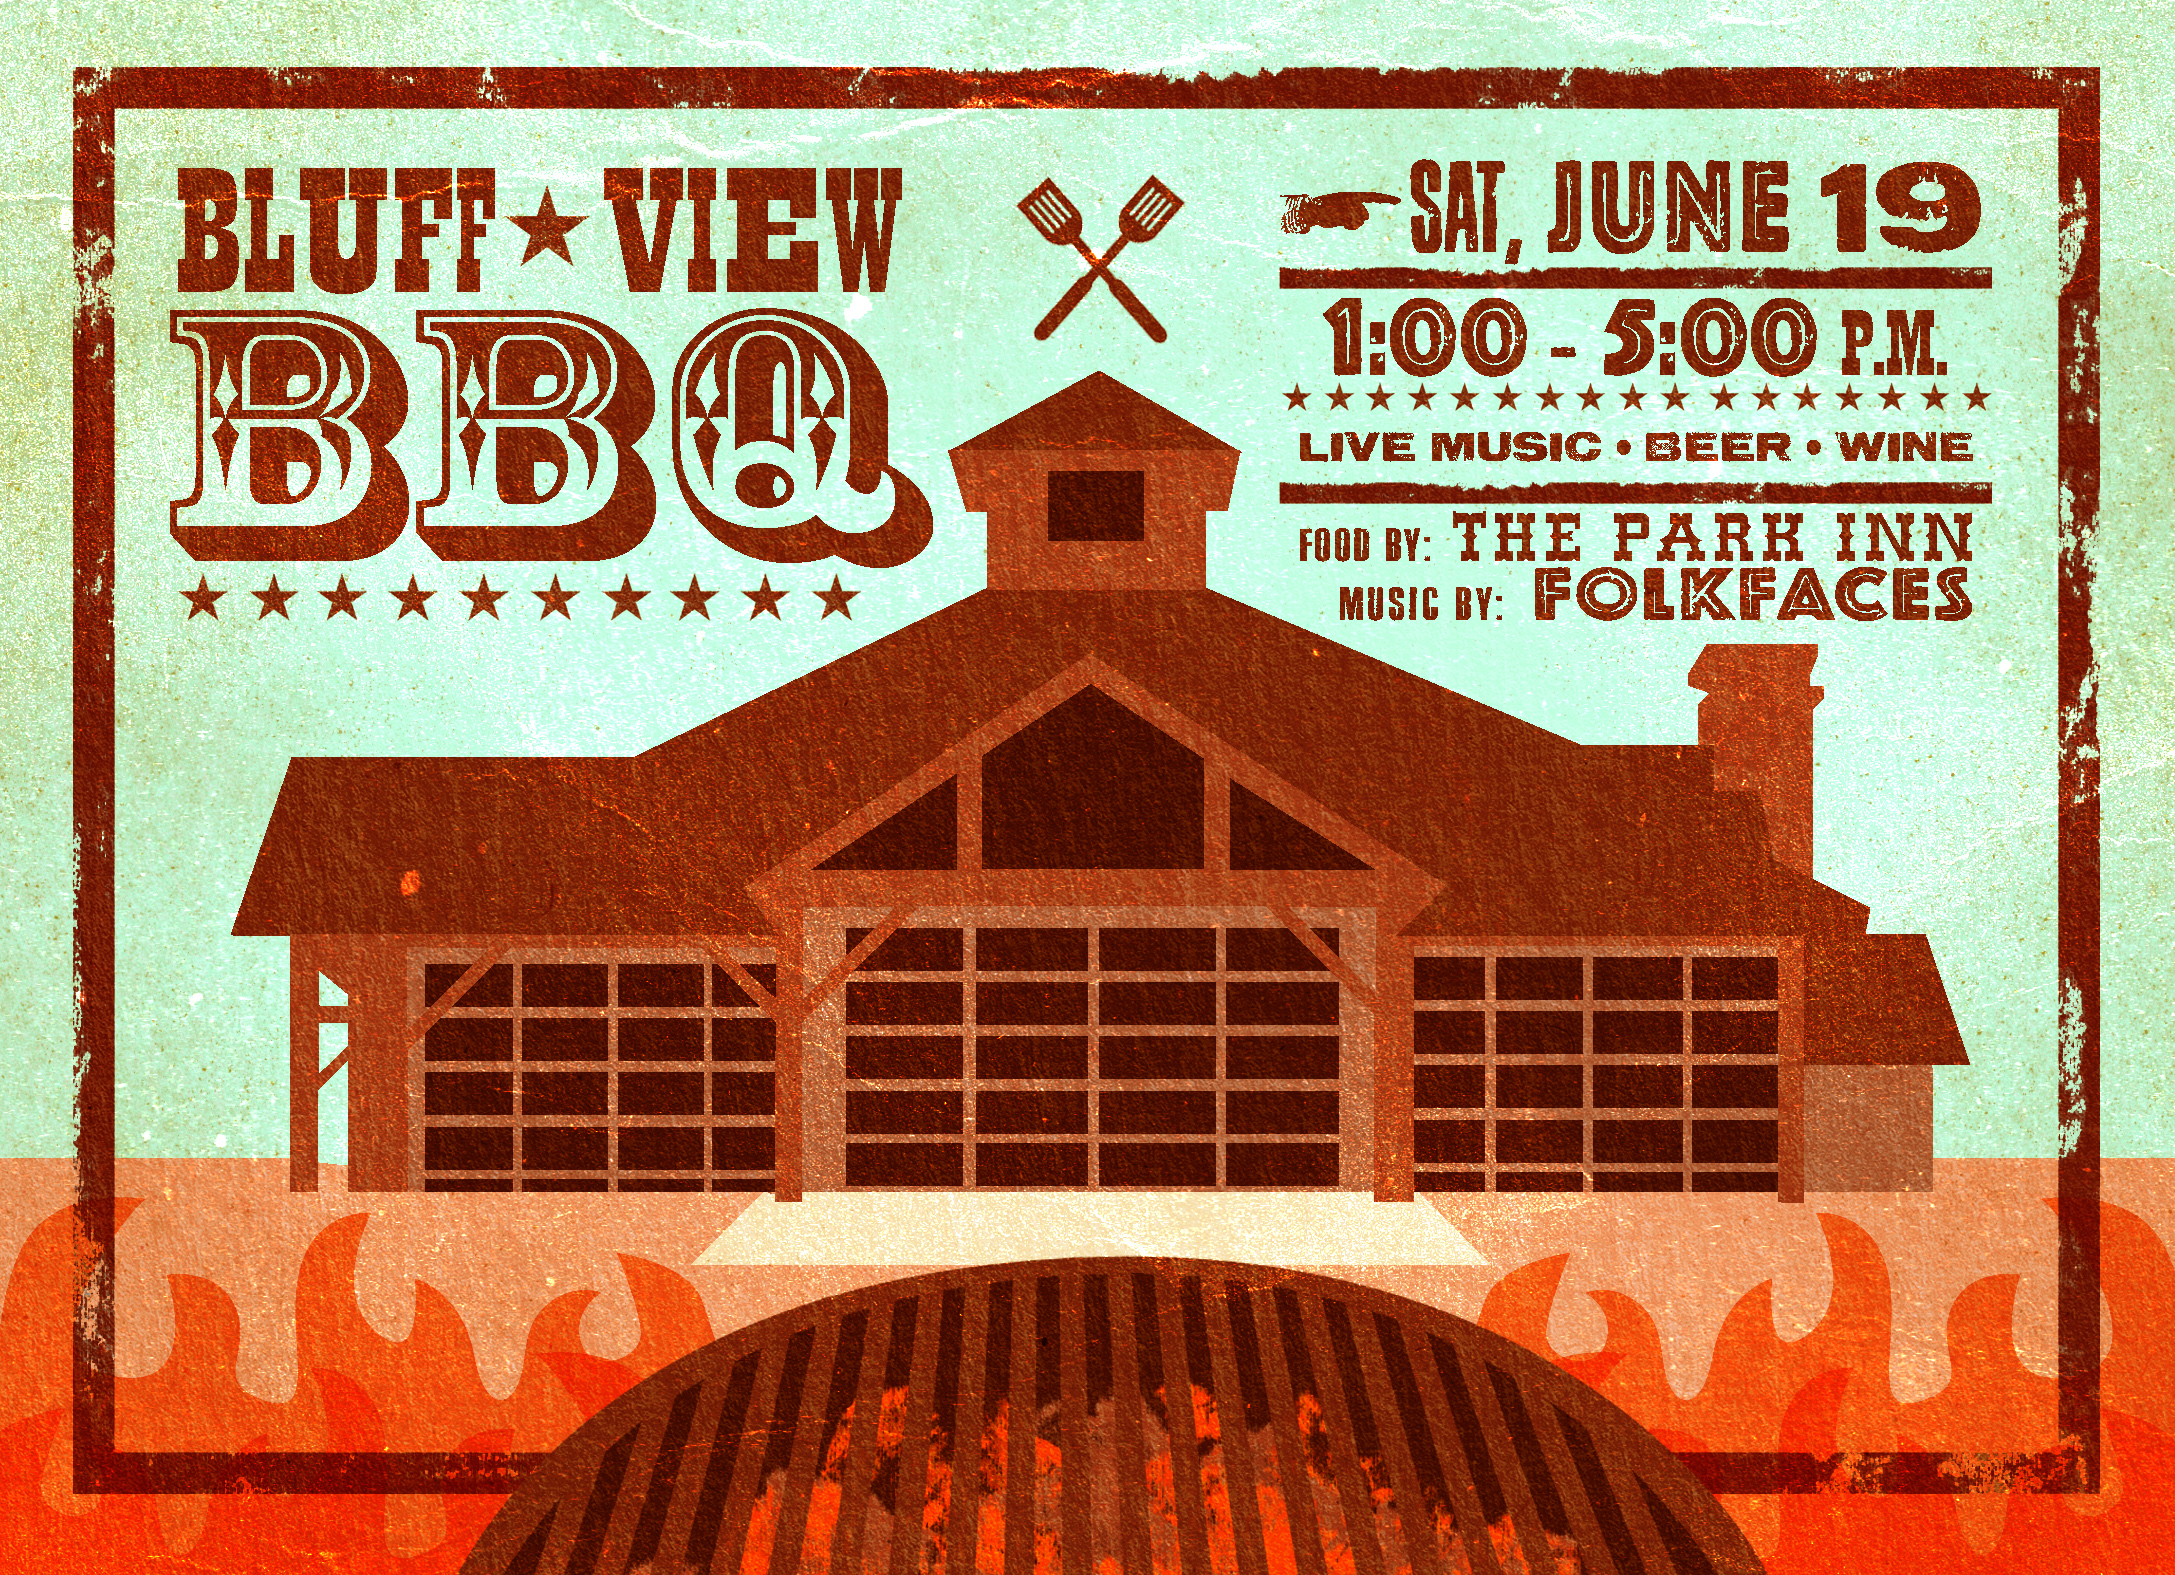 Bluff View BBQ Graphic with text